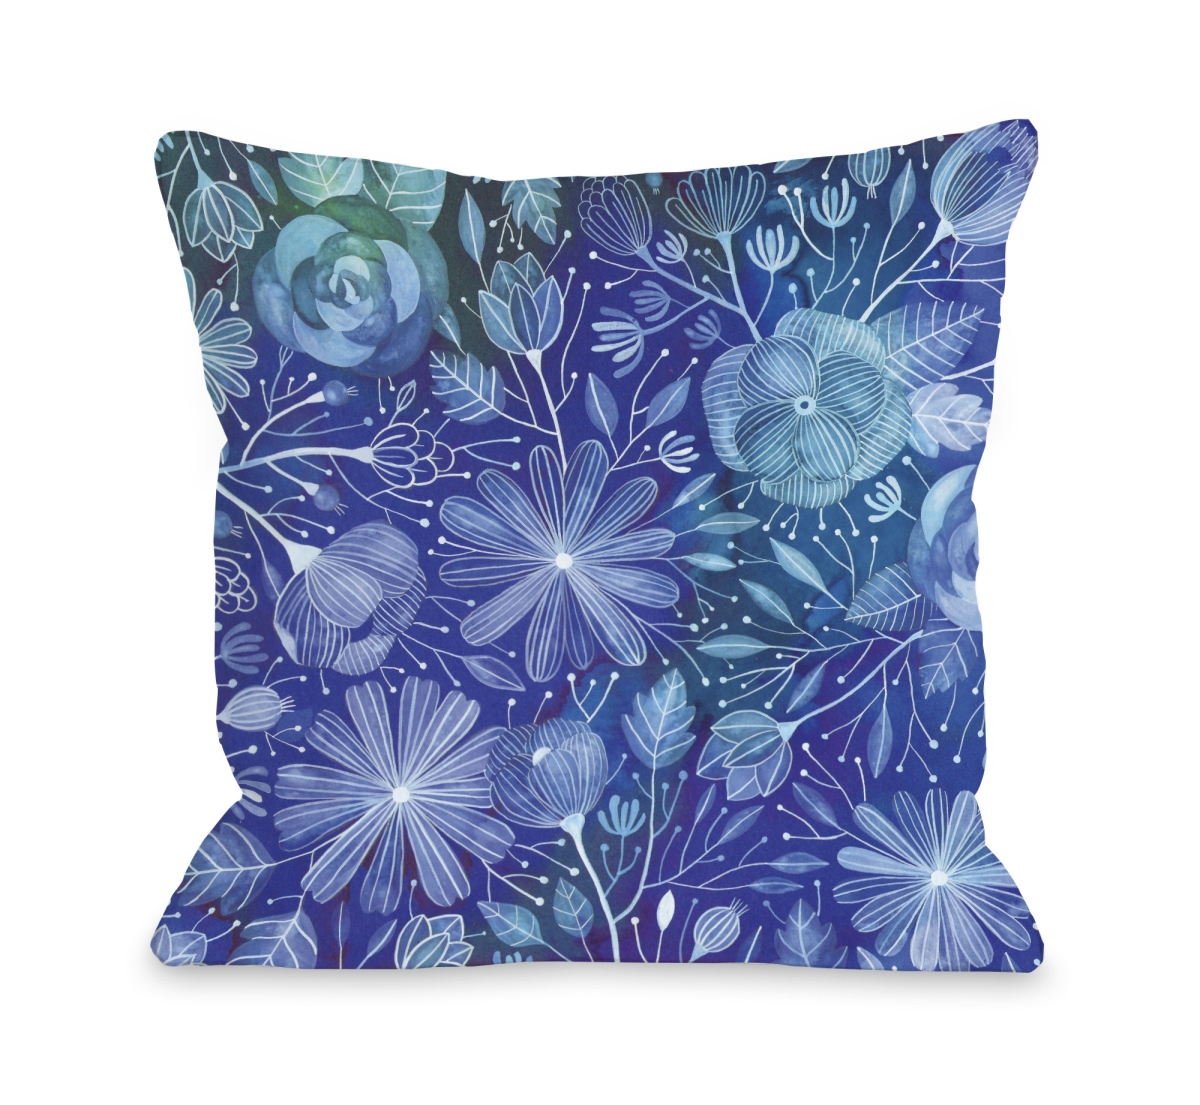 72687pl16o 16 X 16 In. Electric Flowers Pillow Outdoor, Blue